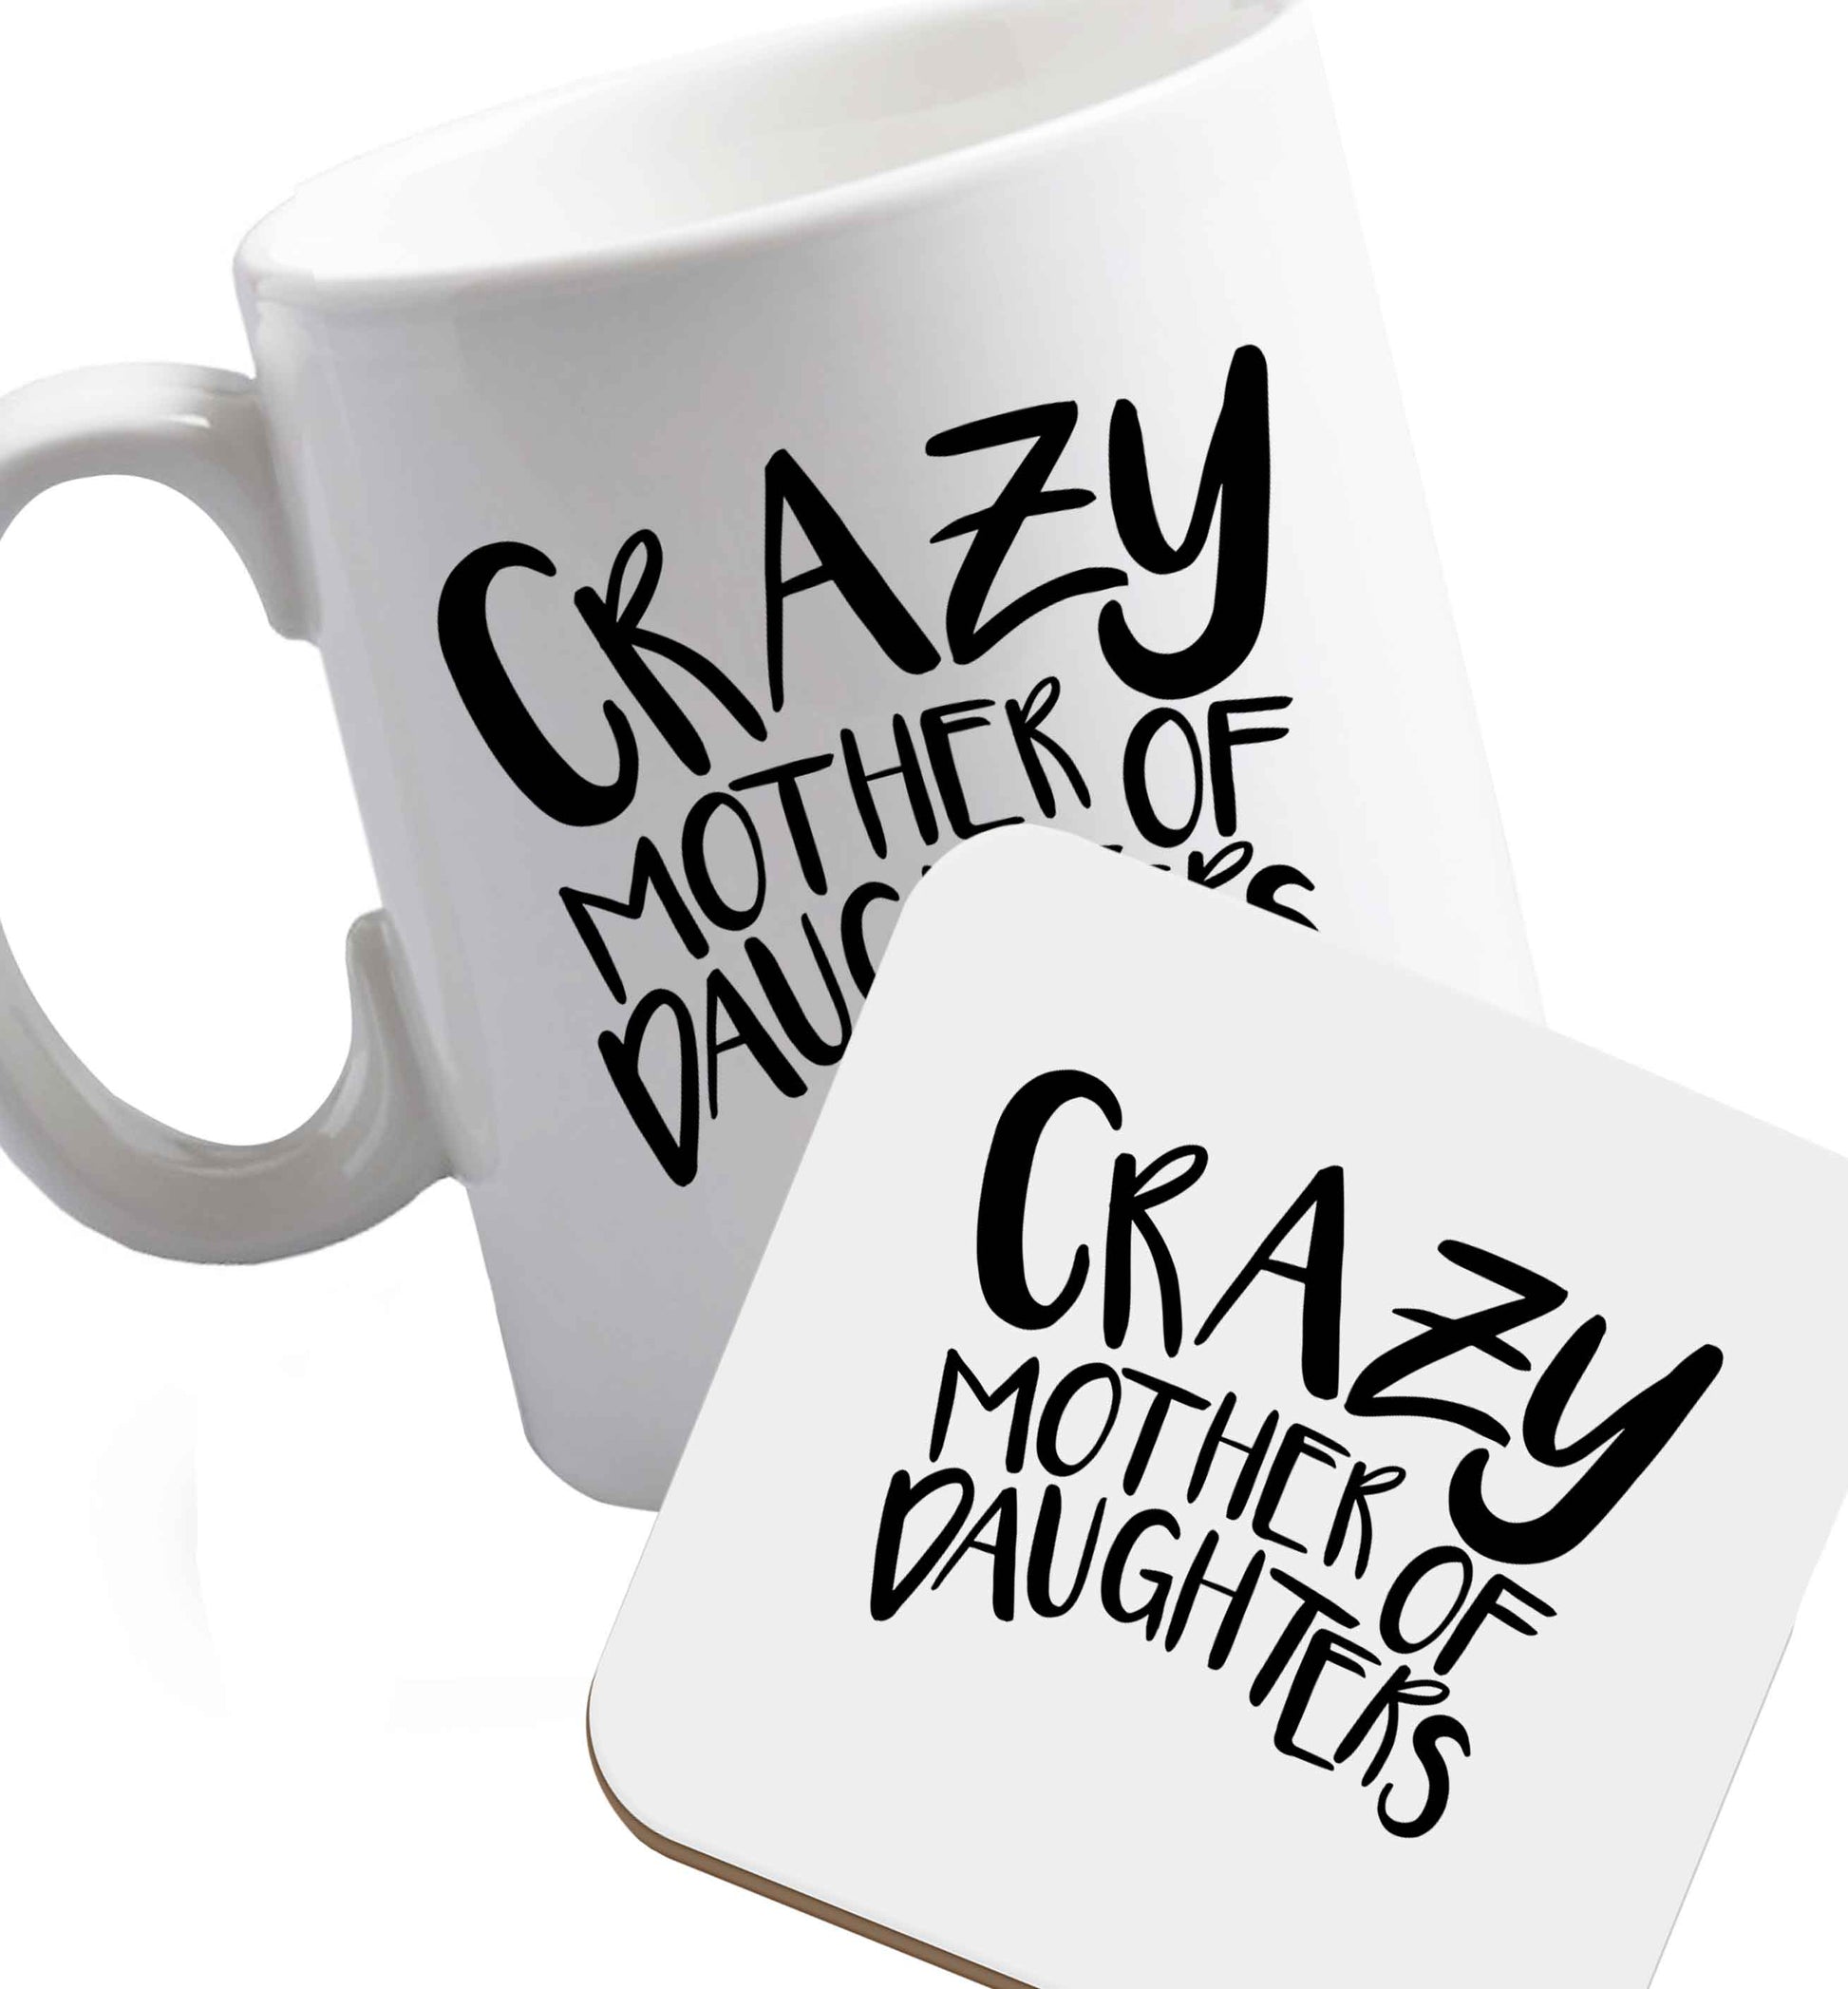 10 oz Crazy mother of daughters ceramic mug and coaster set right handed